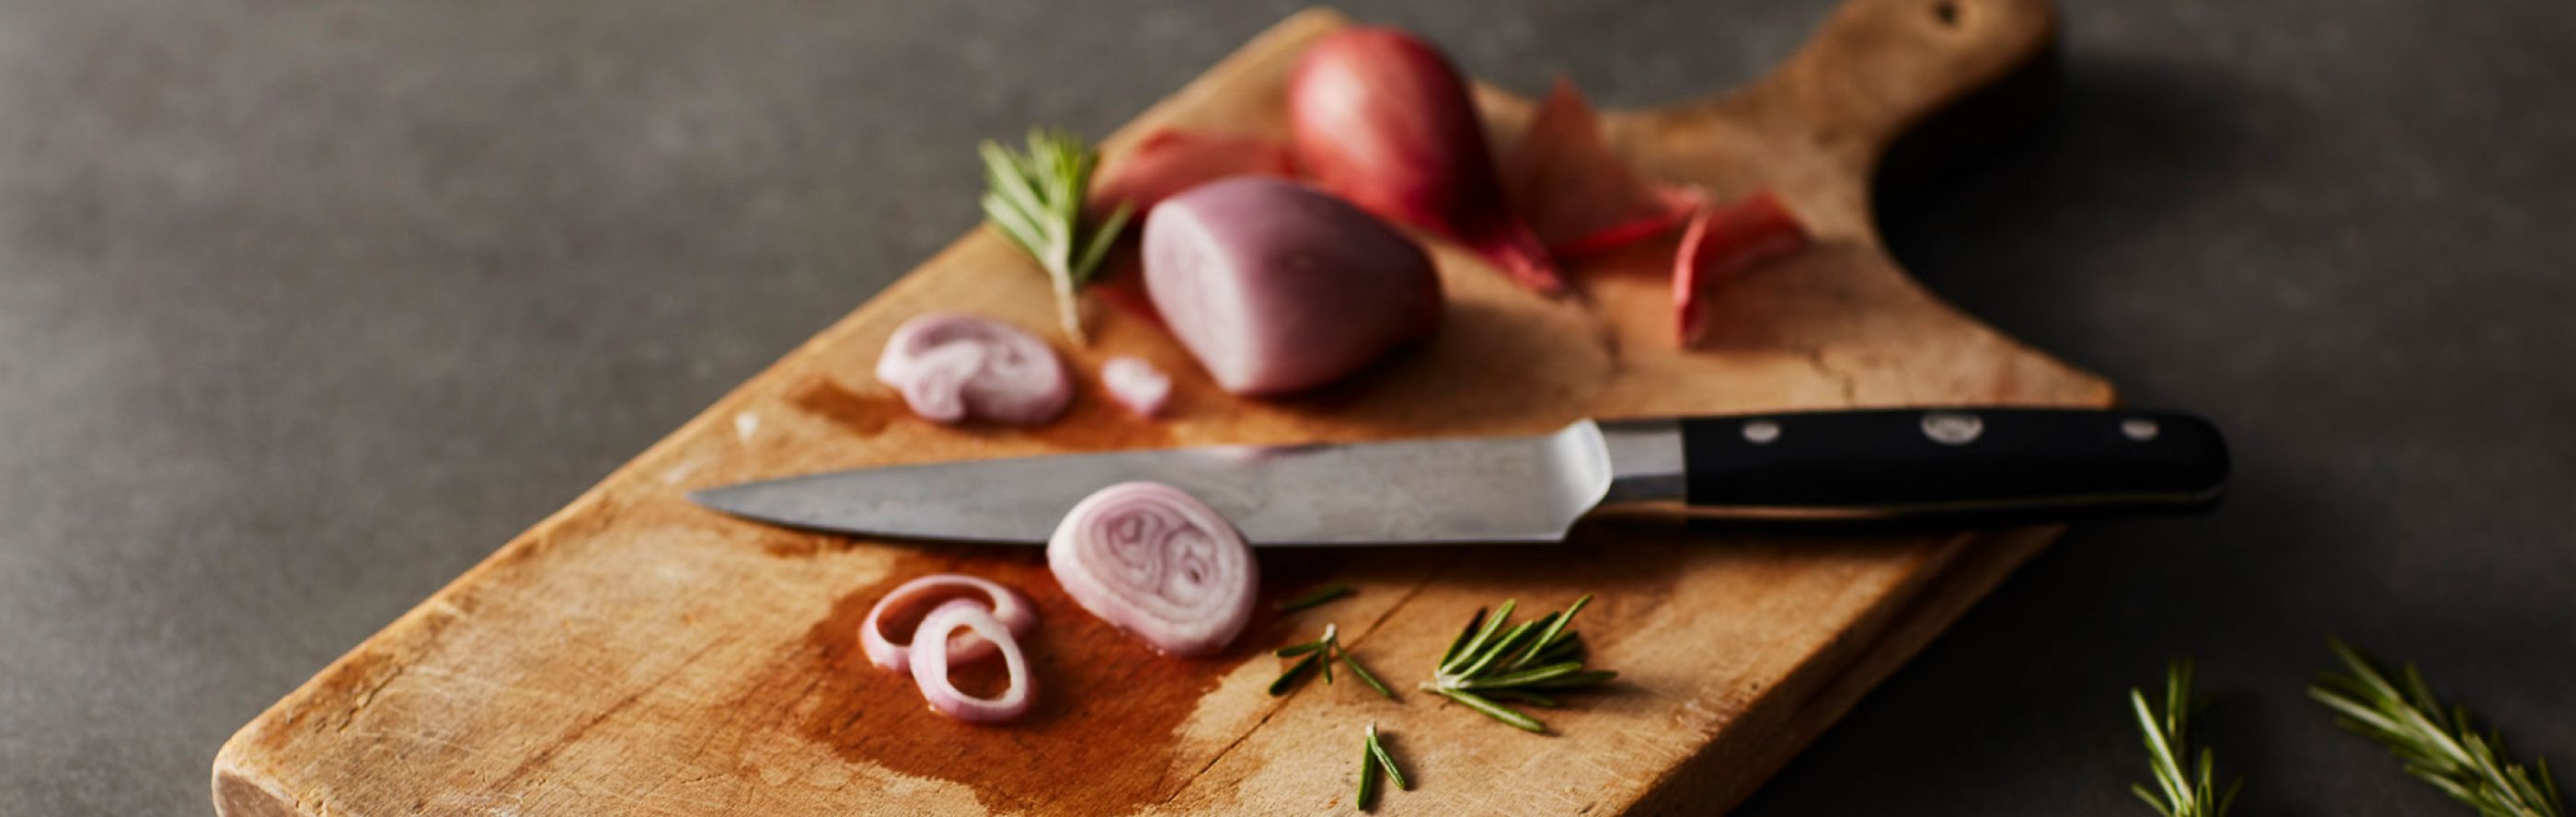 Wooden cutting board with partially cut red onion and knife on top